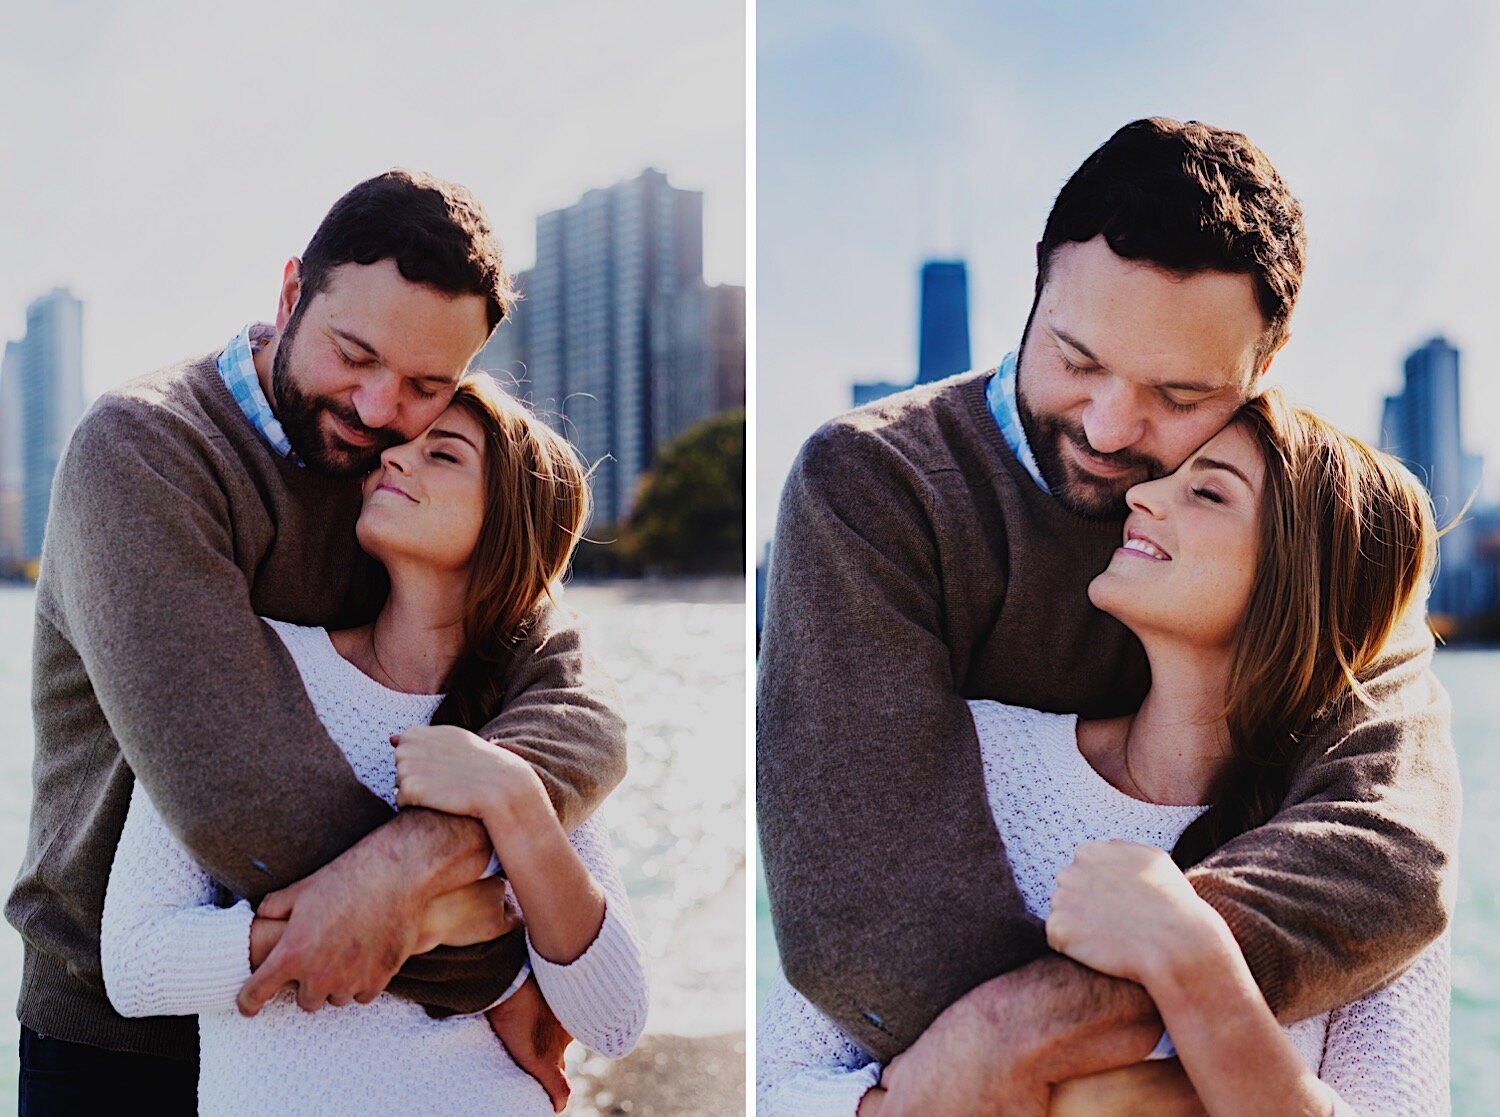 20_Julia-Andy-Chicago-EngagementSession-62_Julia-Andy-Chicago-EngagementSession-63.jpg